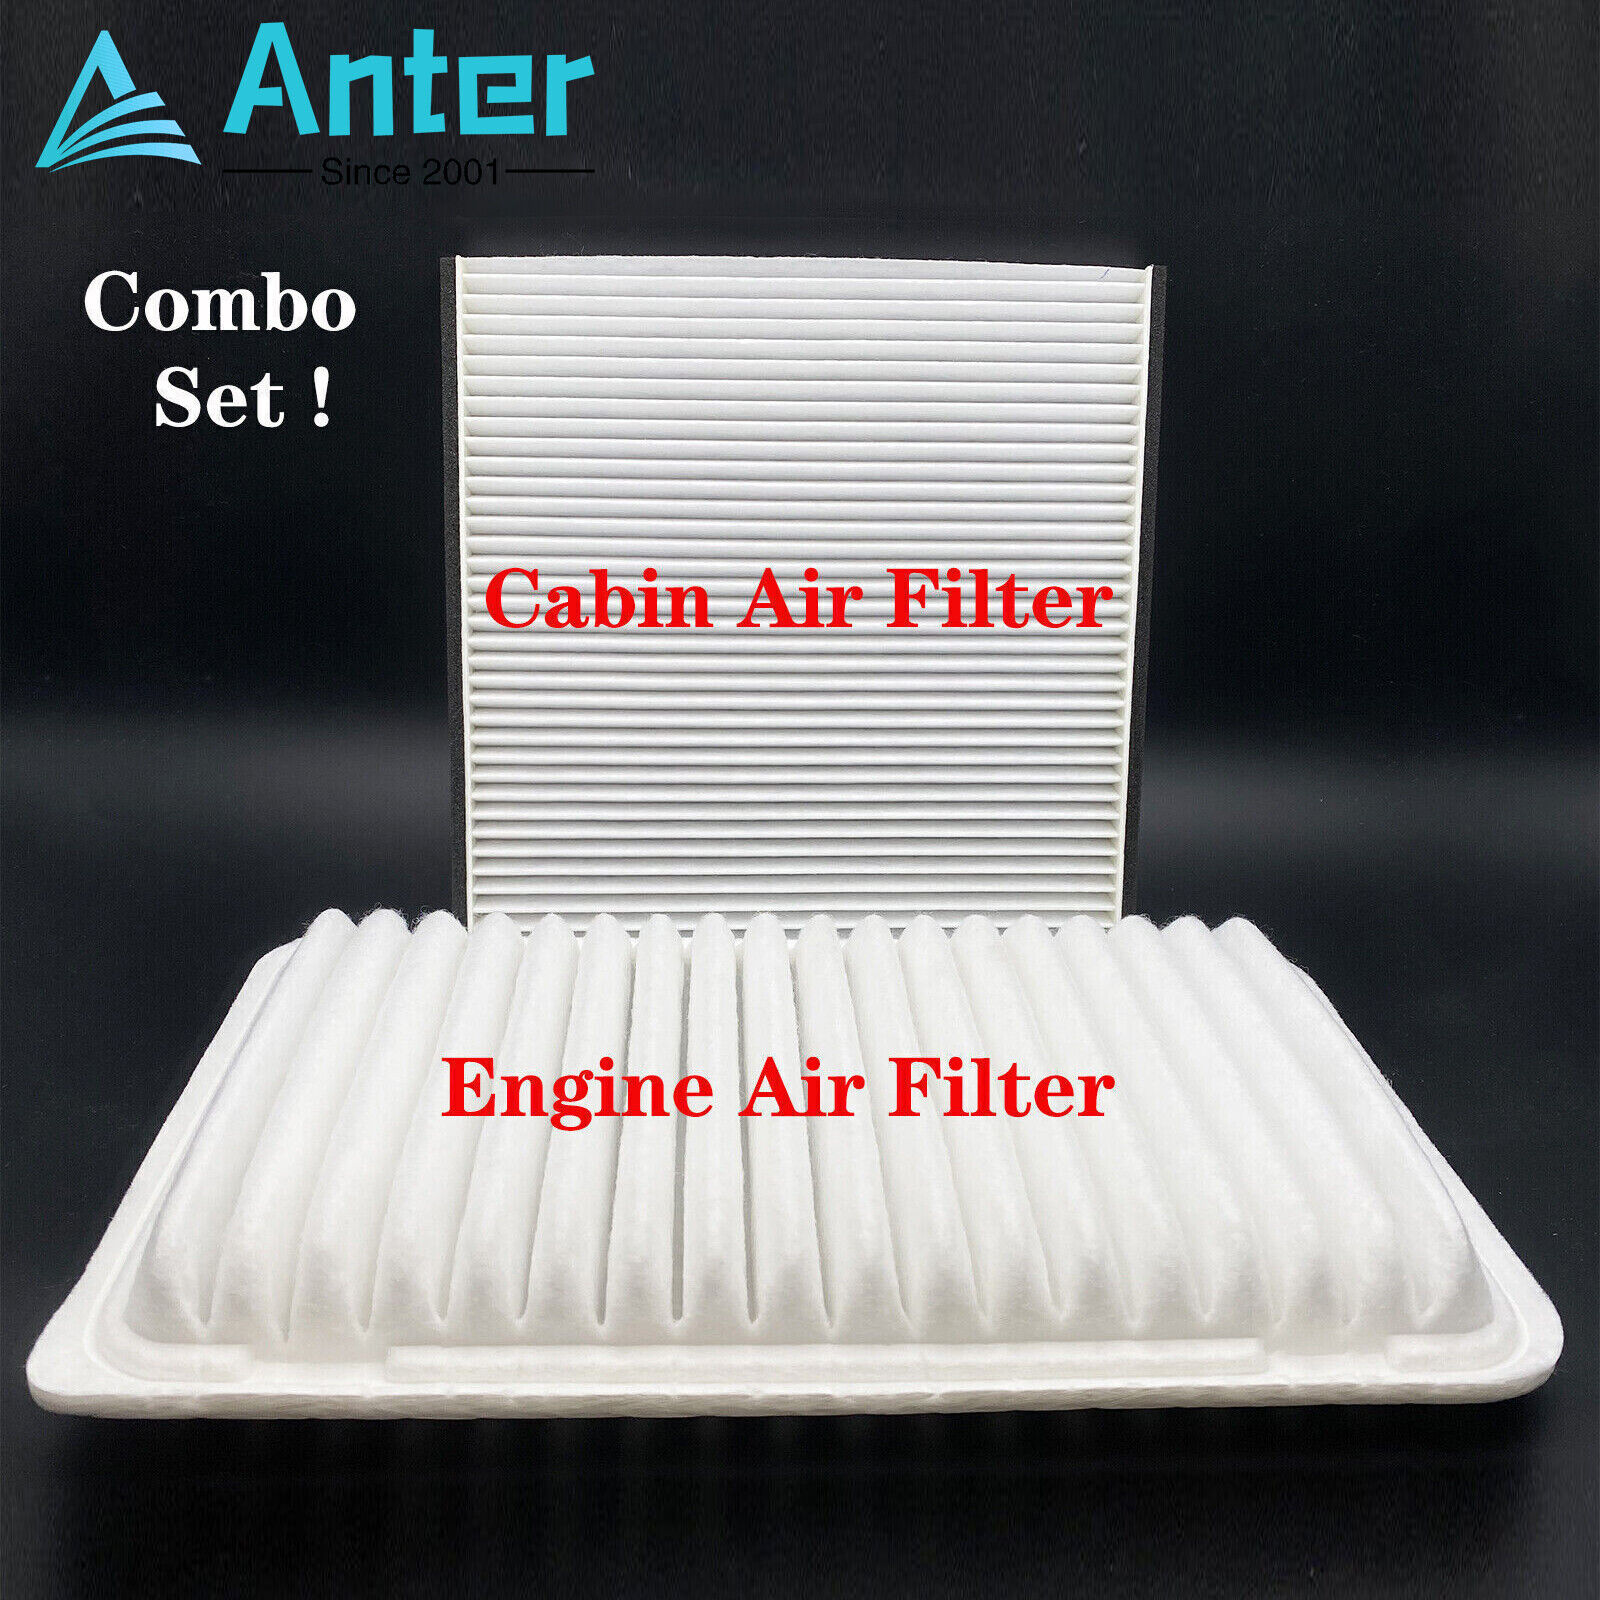 Engine & Cabin Air Filter Combo Set For Toyota Sienna Camry Lexus RX350 ES330